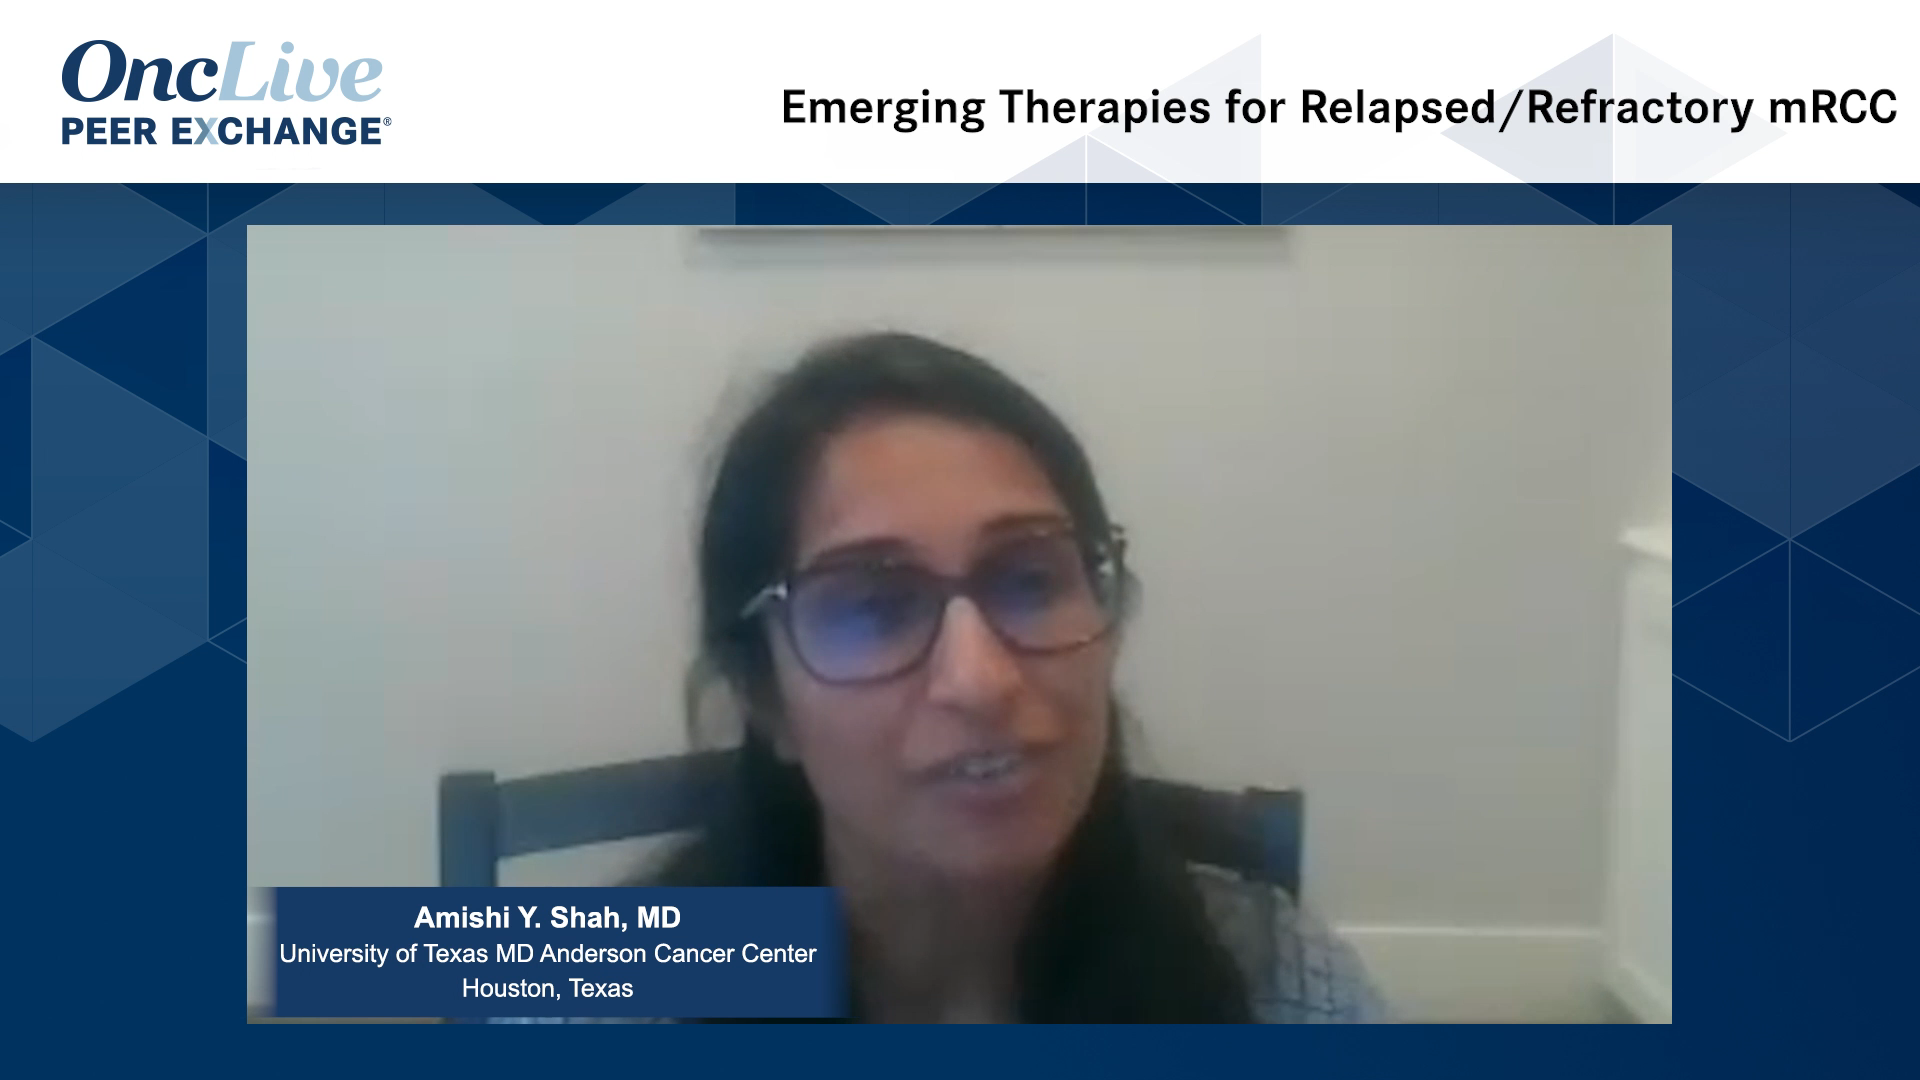 Emerging Therapies for Relapsed/Refractory mRCC